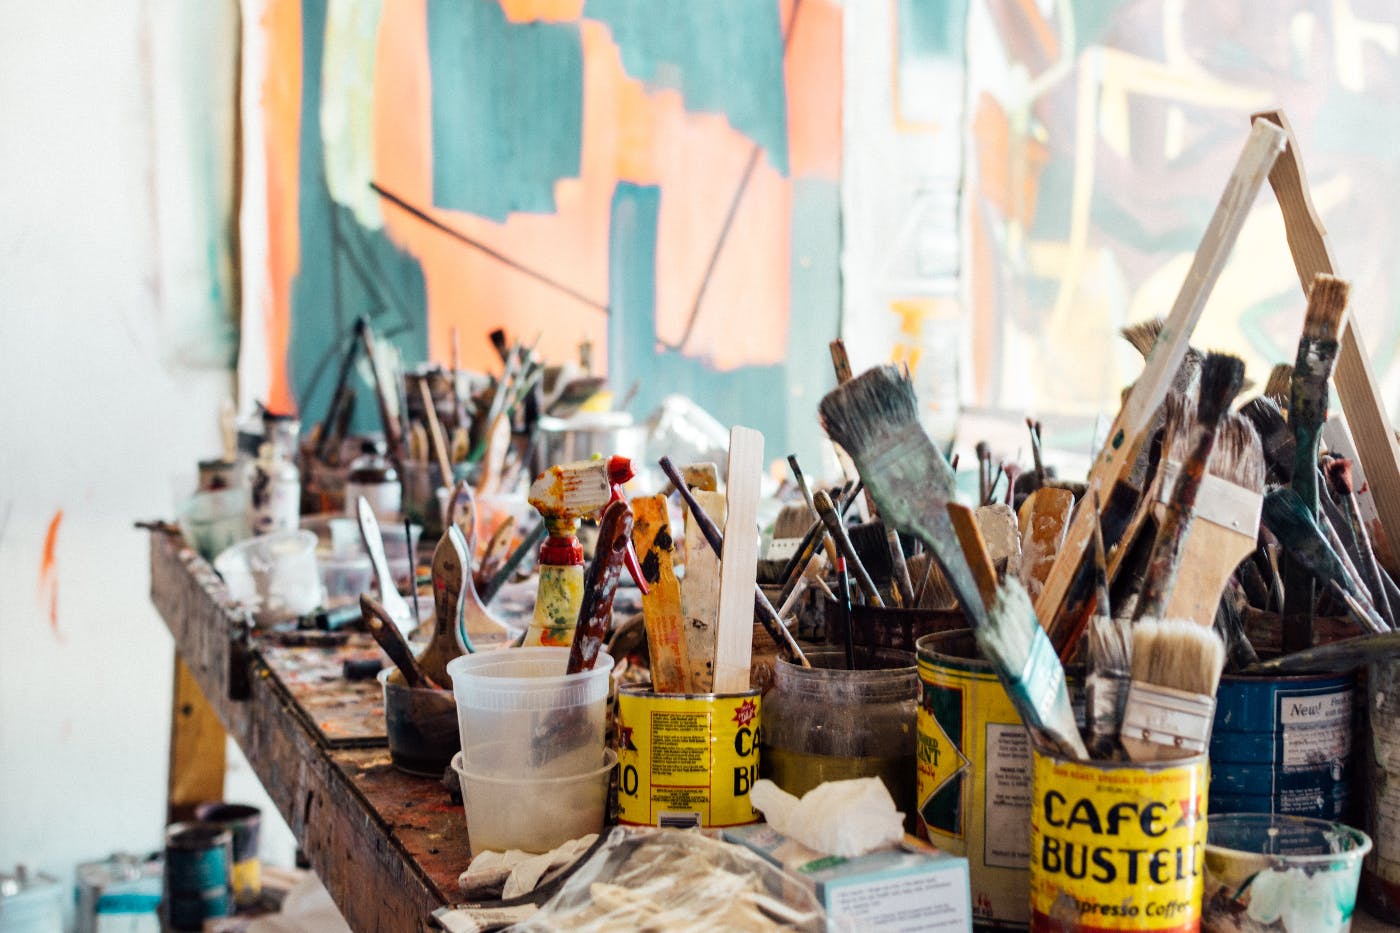 A painter's table covered with used brushes, cans, jars and paints